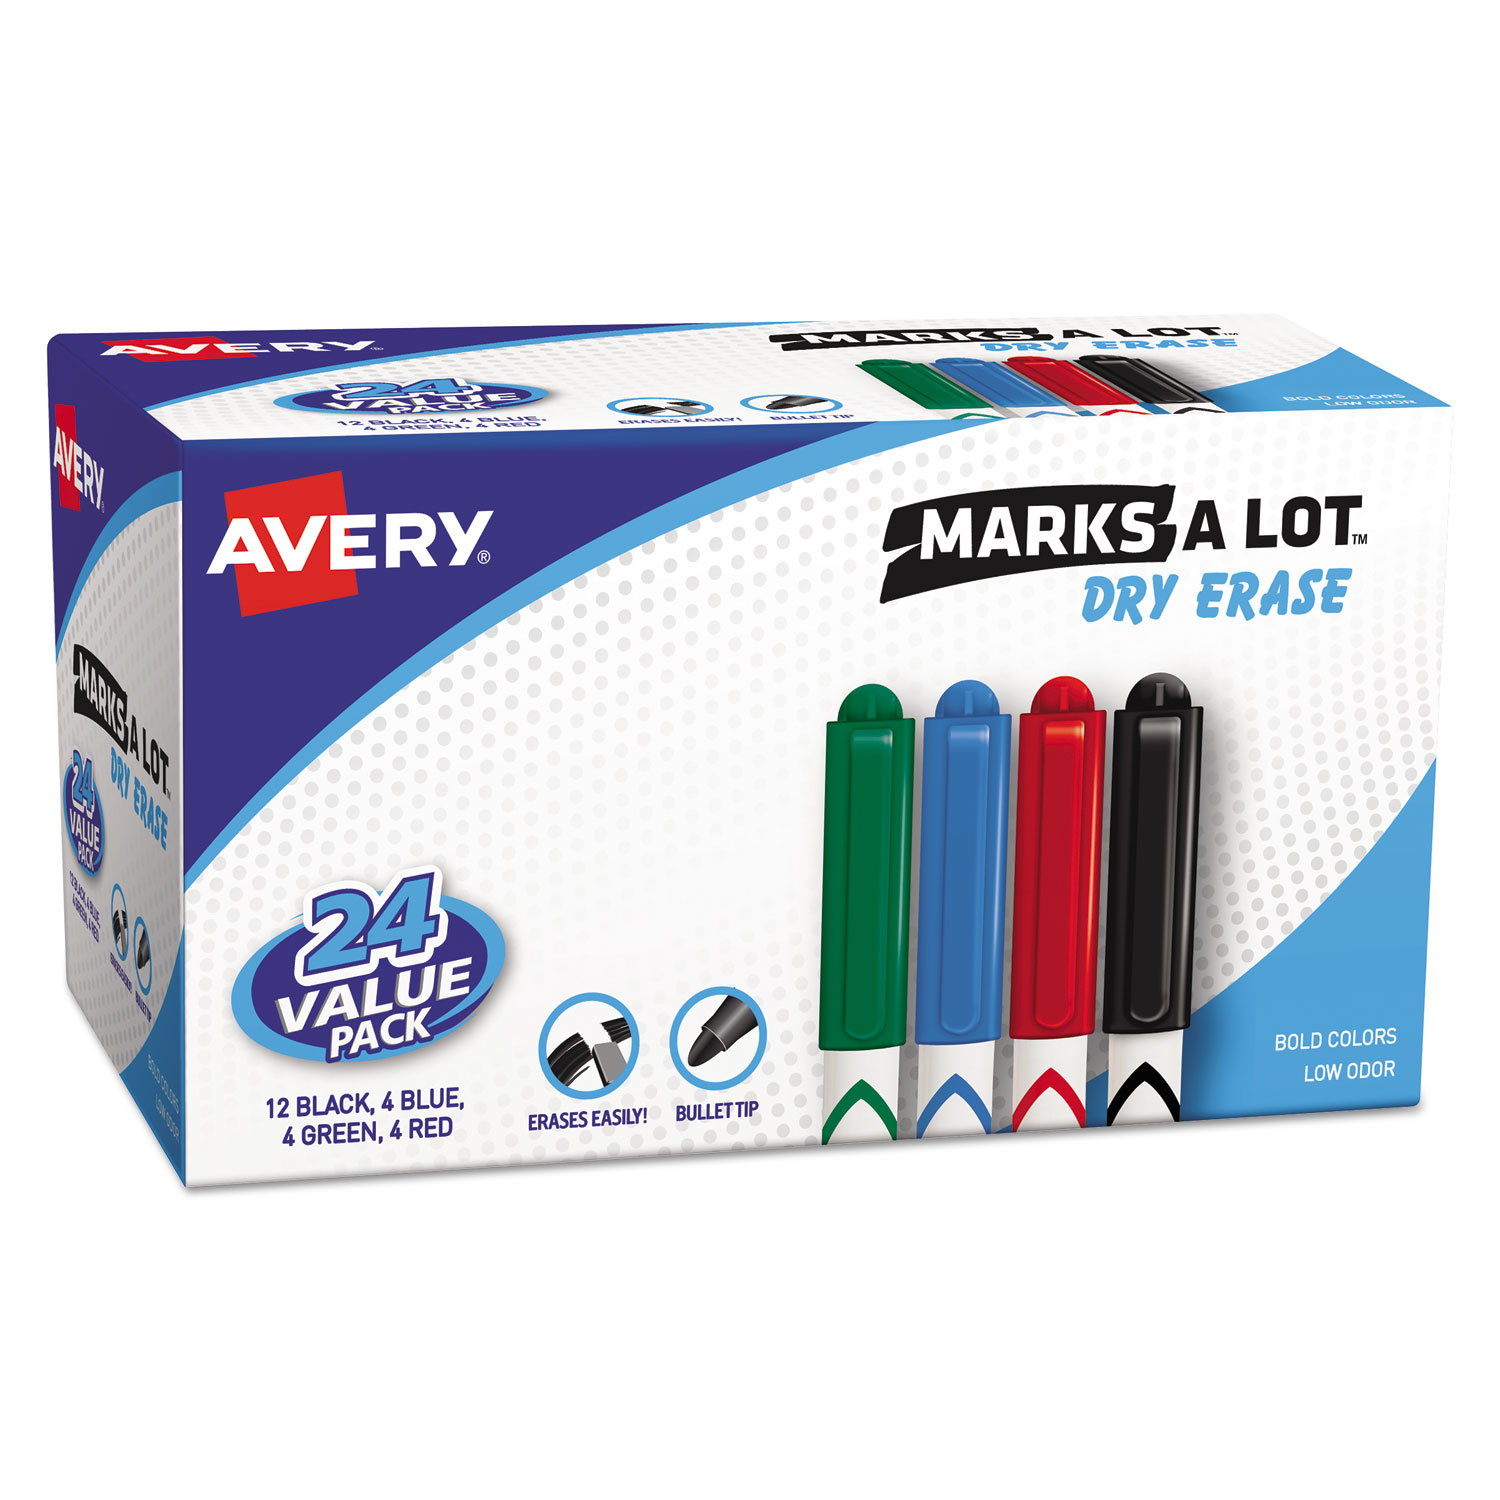  Avery 29860 MARKS A LOT Pen-Style Dry Erase Marker Value Pack, Medium Chisel Tip, Assorted Colors, 24/Set (AVE29860) 